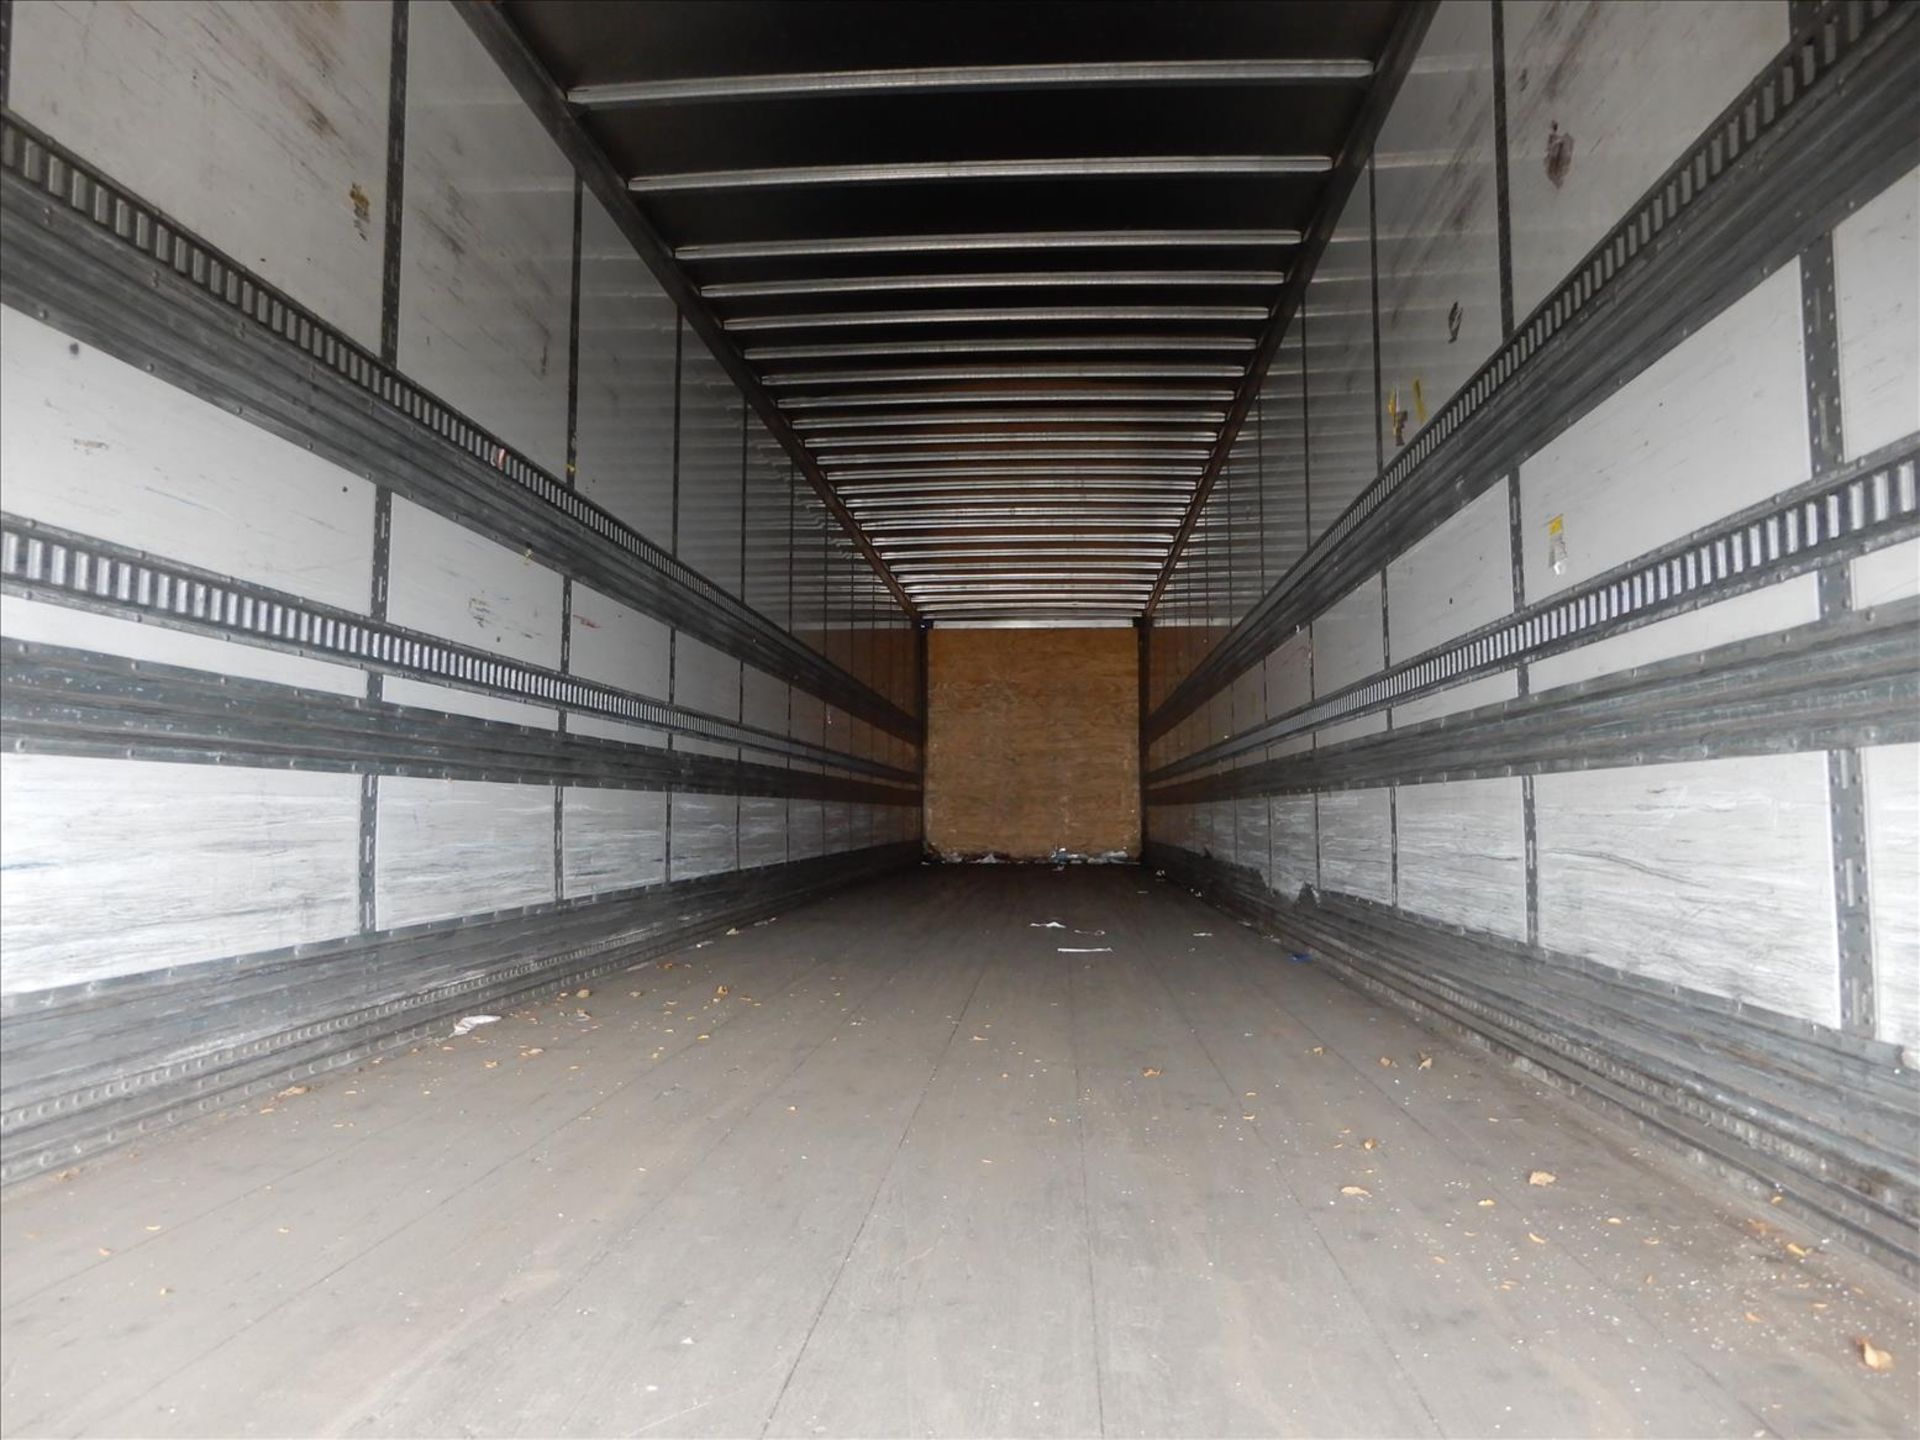 2012 Stoughton Trailer - Located in Indianapolis, IN - Image 21 of 31